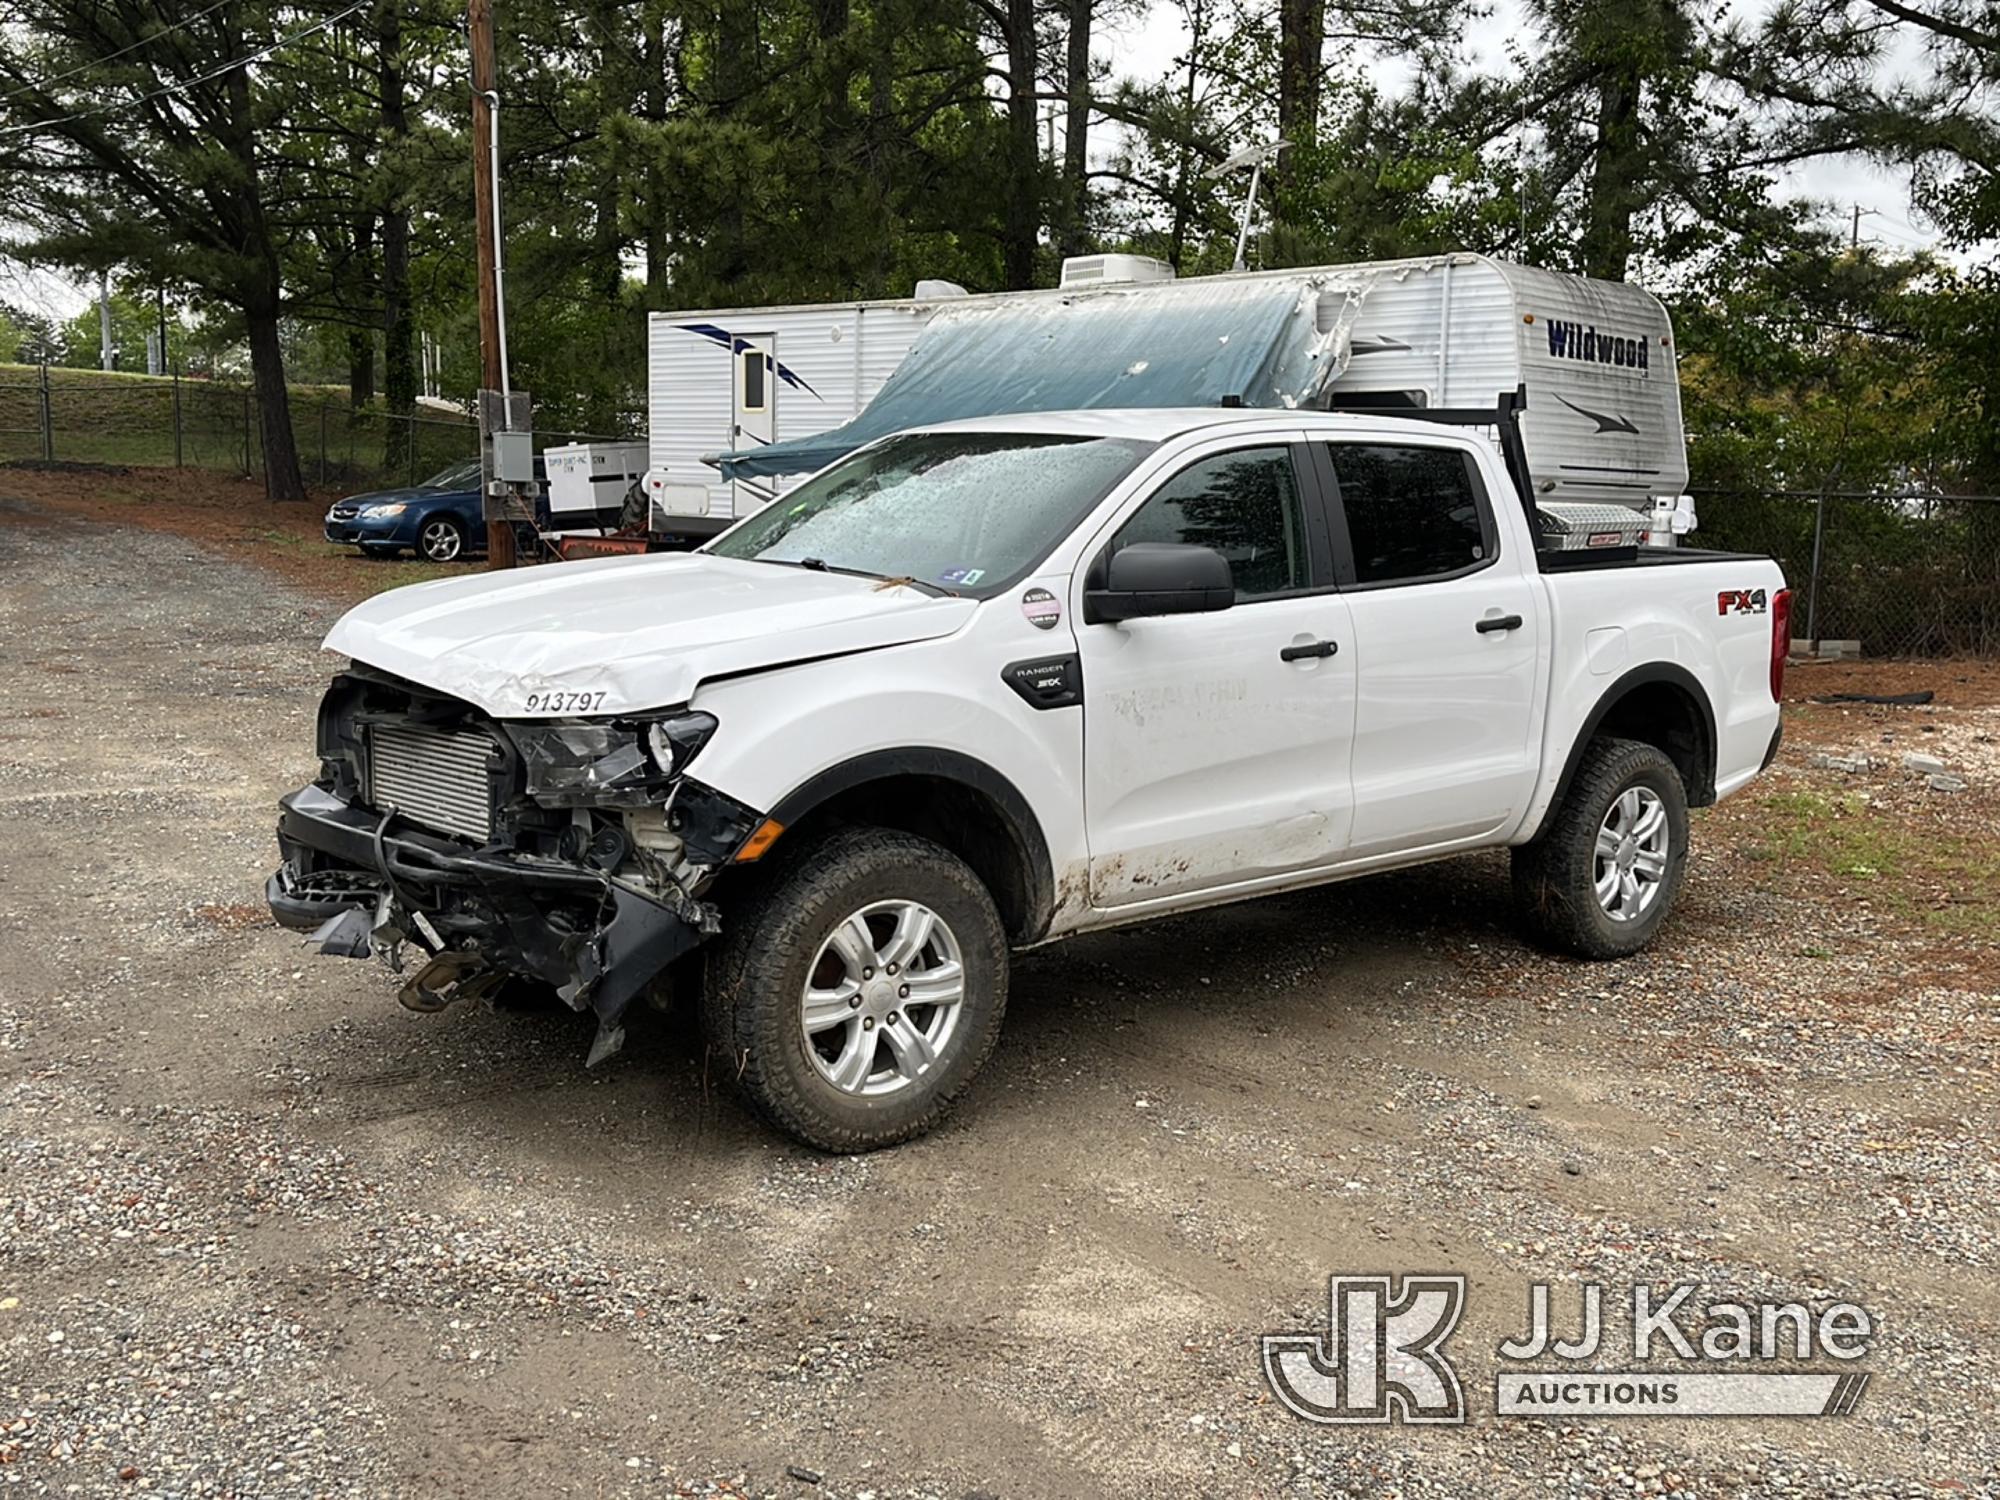 (Charlotte, NC) 2021 Ford Ranger 4x4 Crew-Cab Pickup Truck Runs & Moves) (Wrecked, Not Drivable, Che